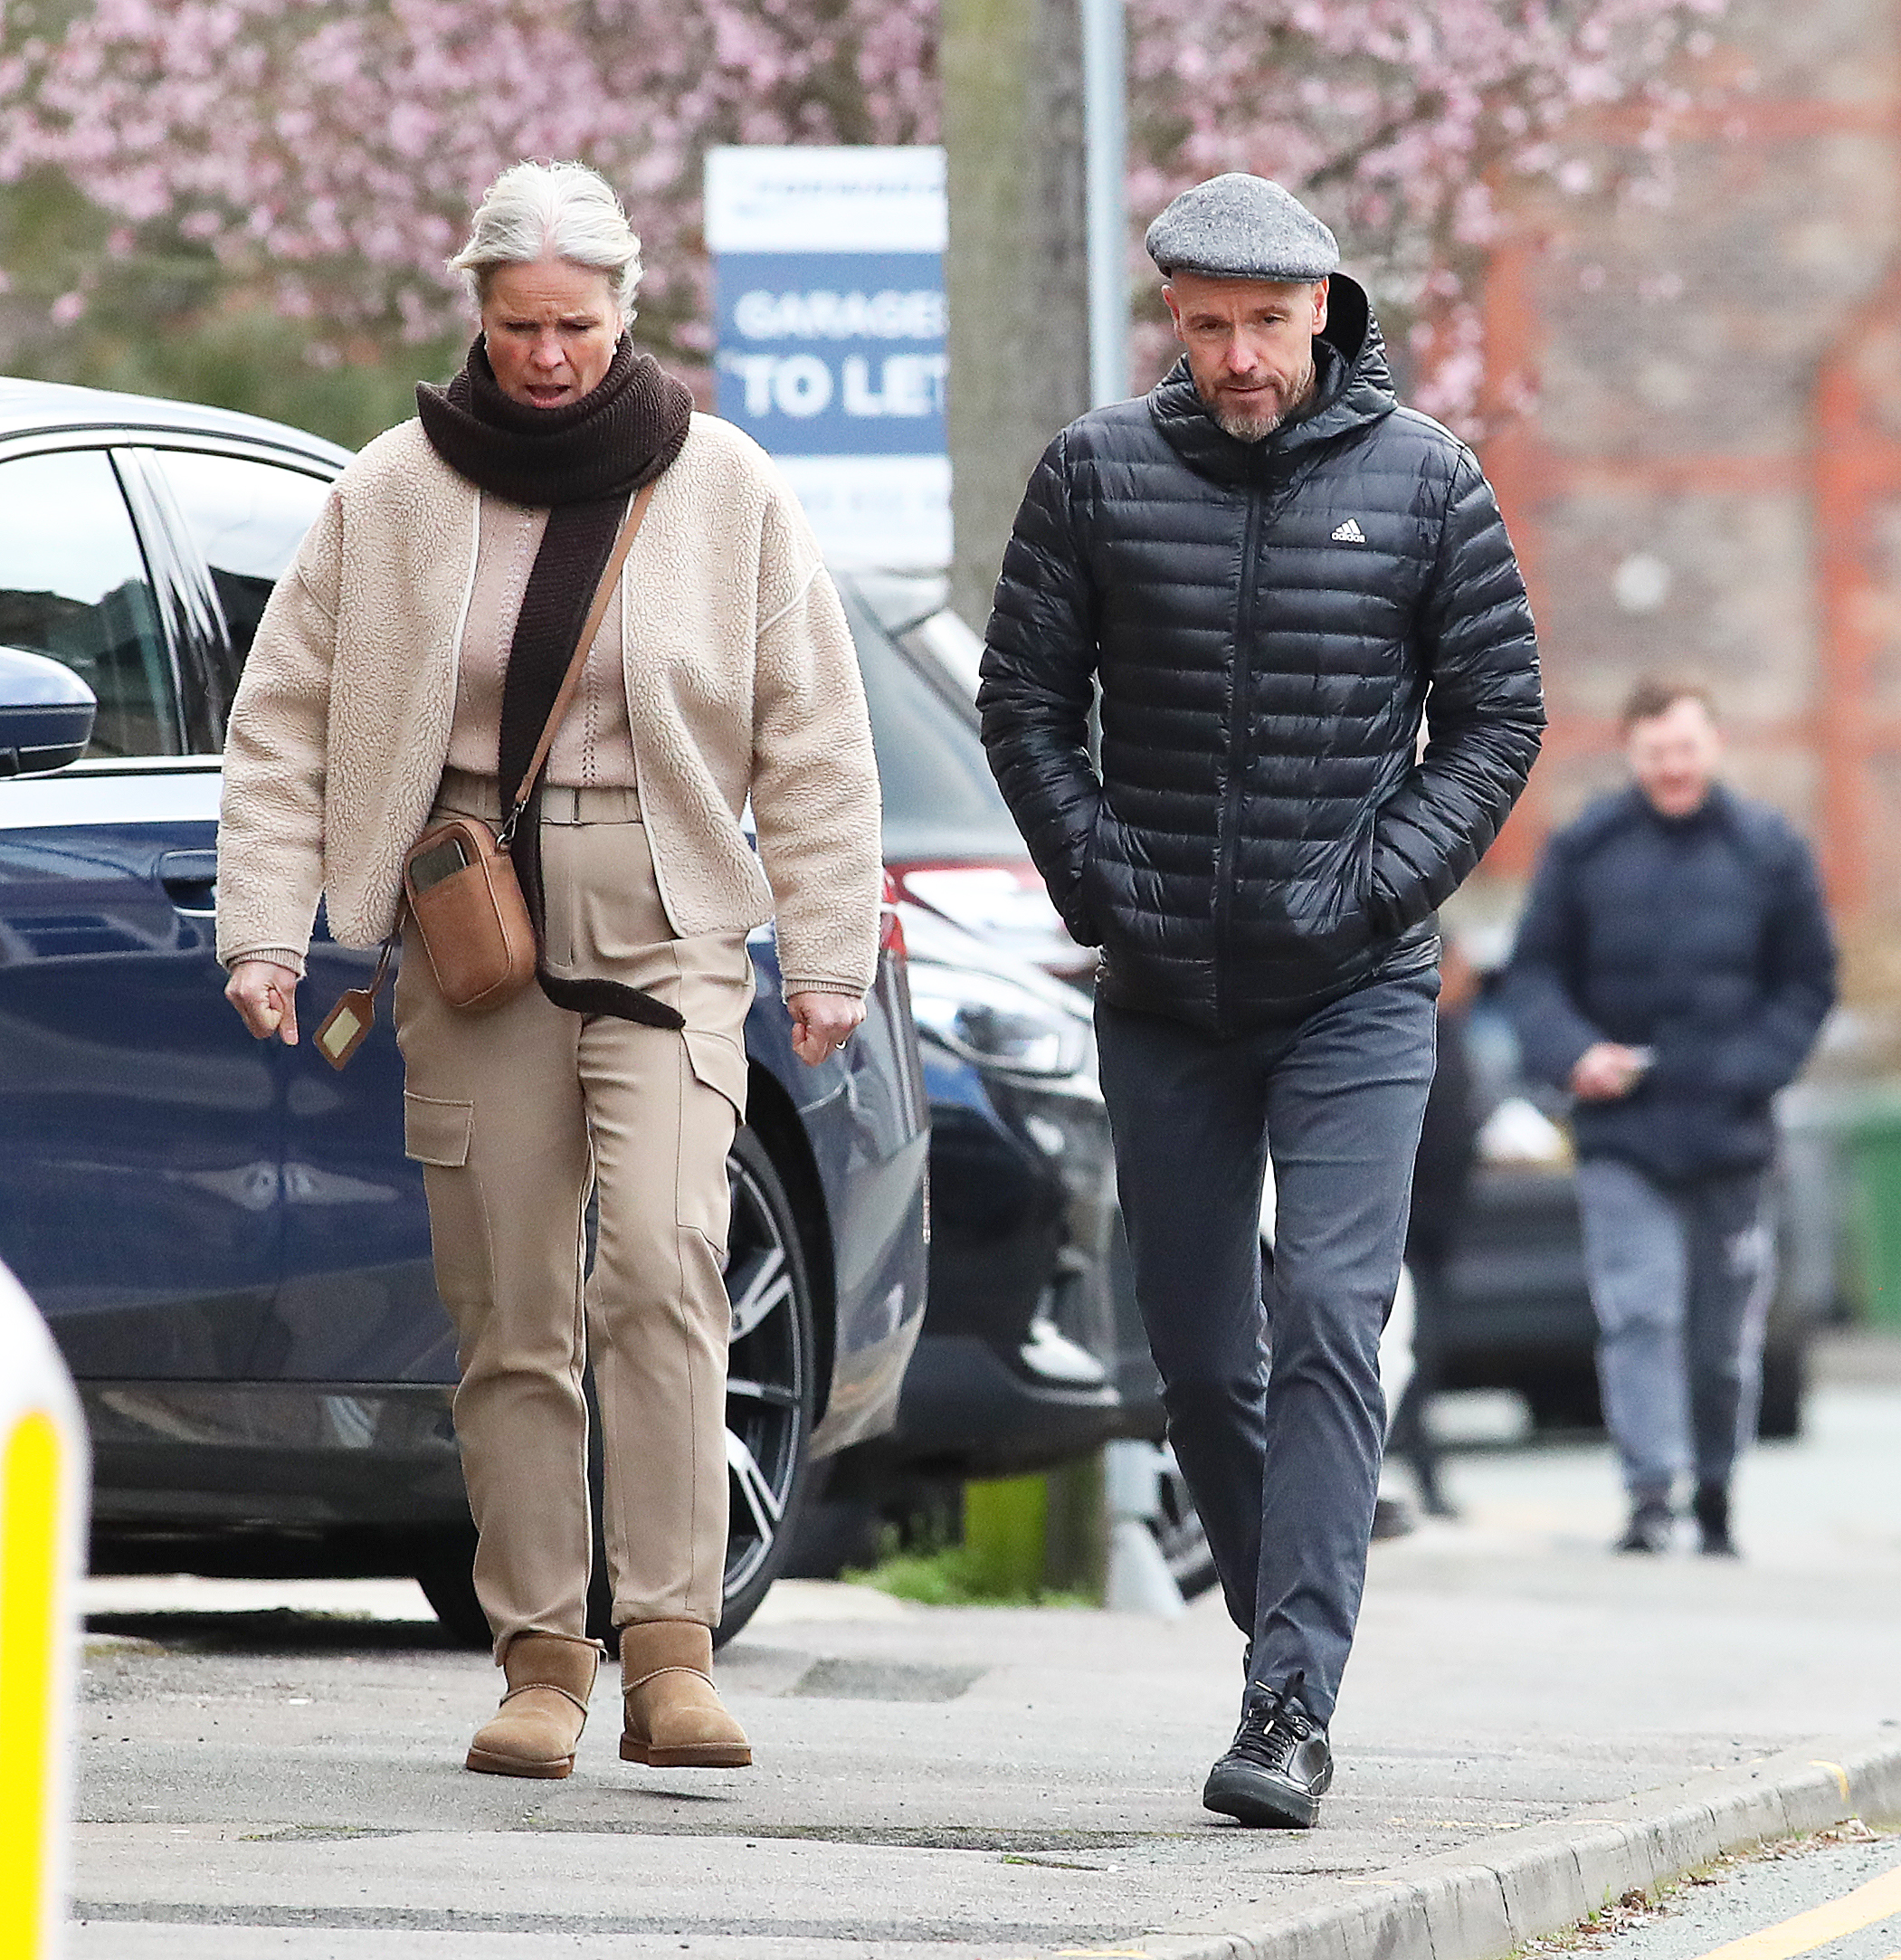 Erik ten Hag was spotted taking a walk with his wife Bianca